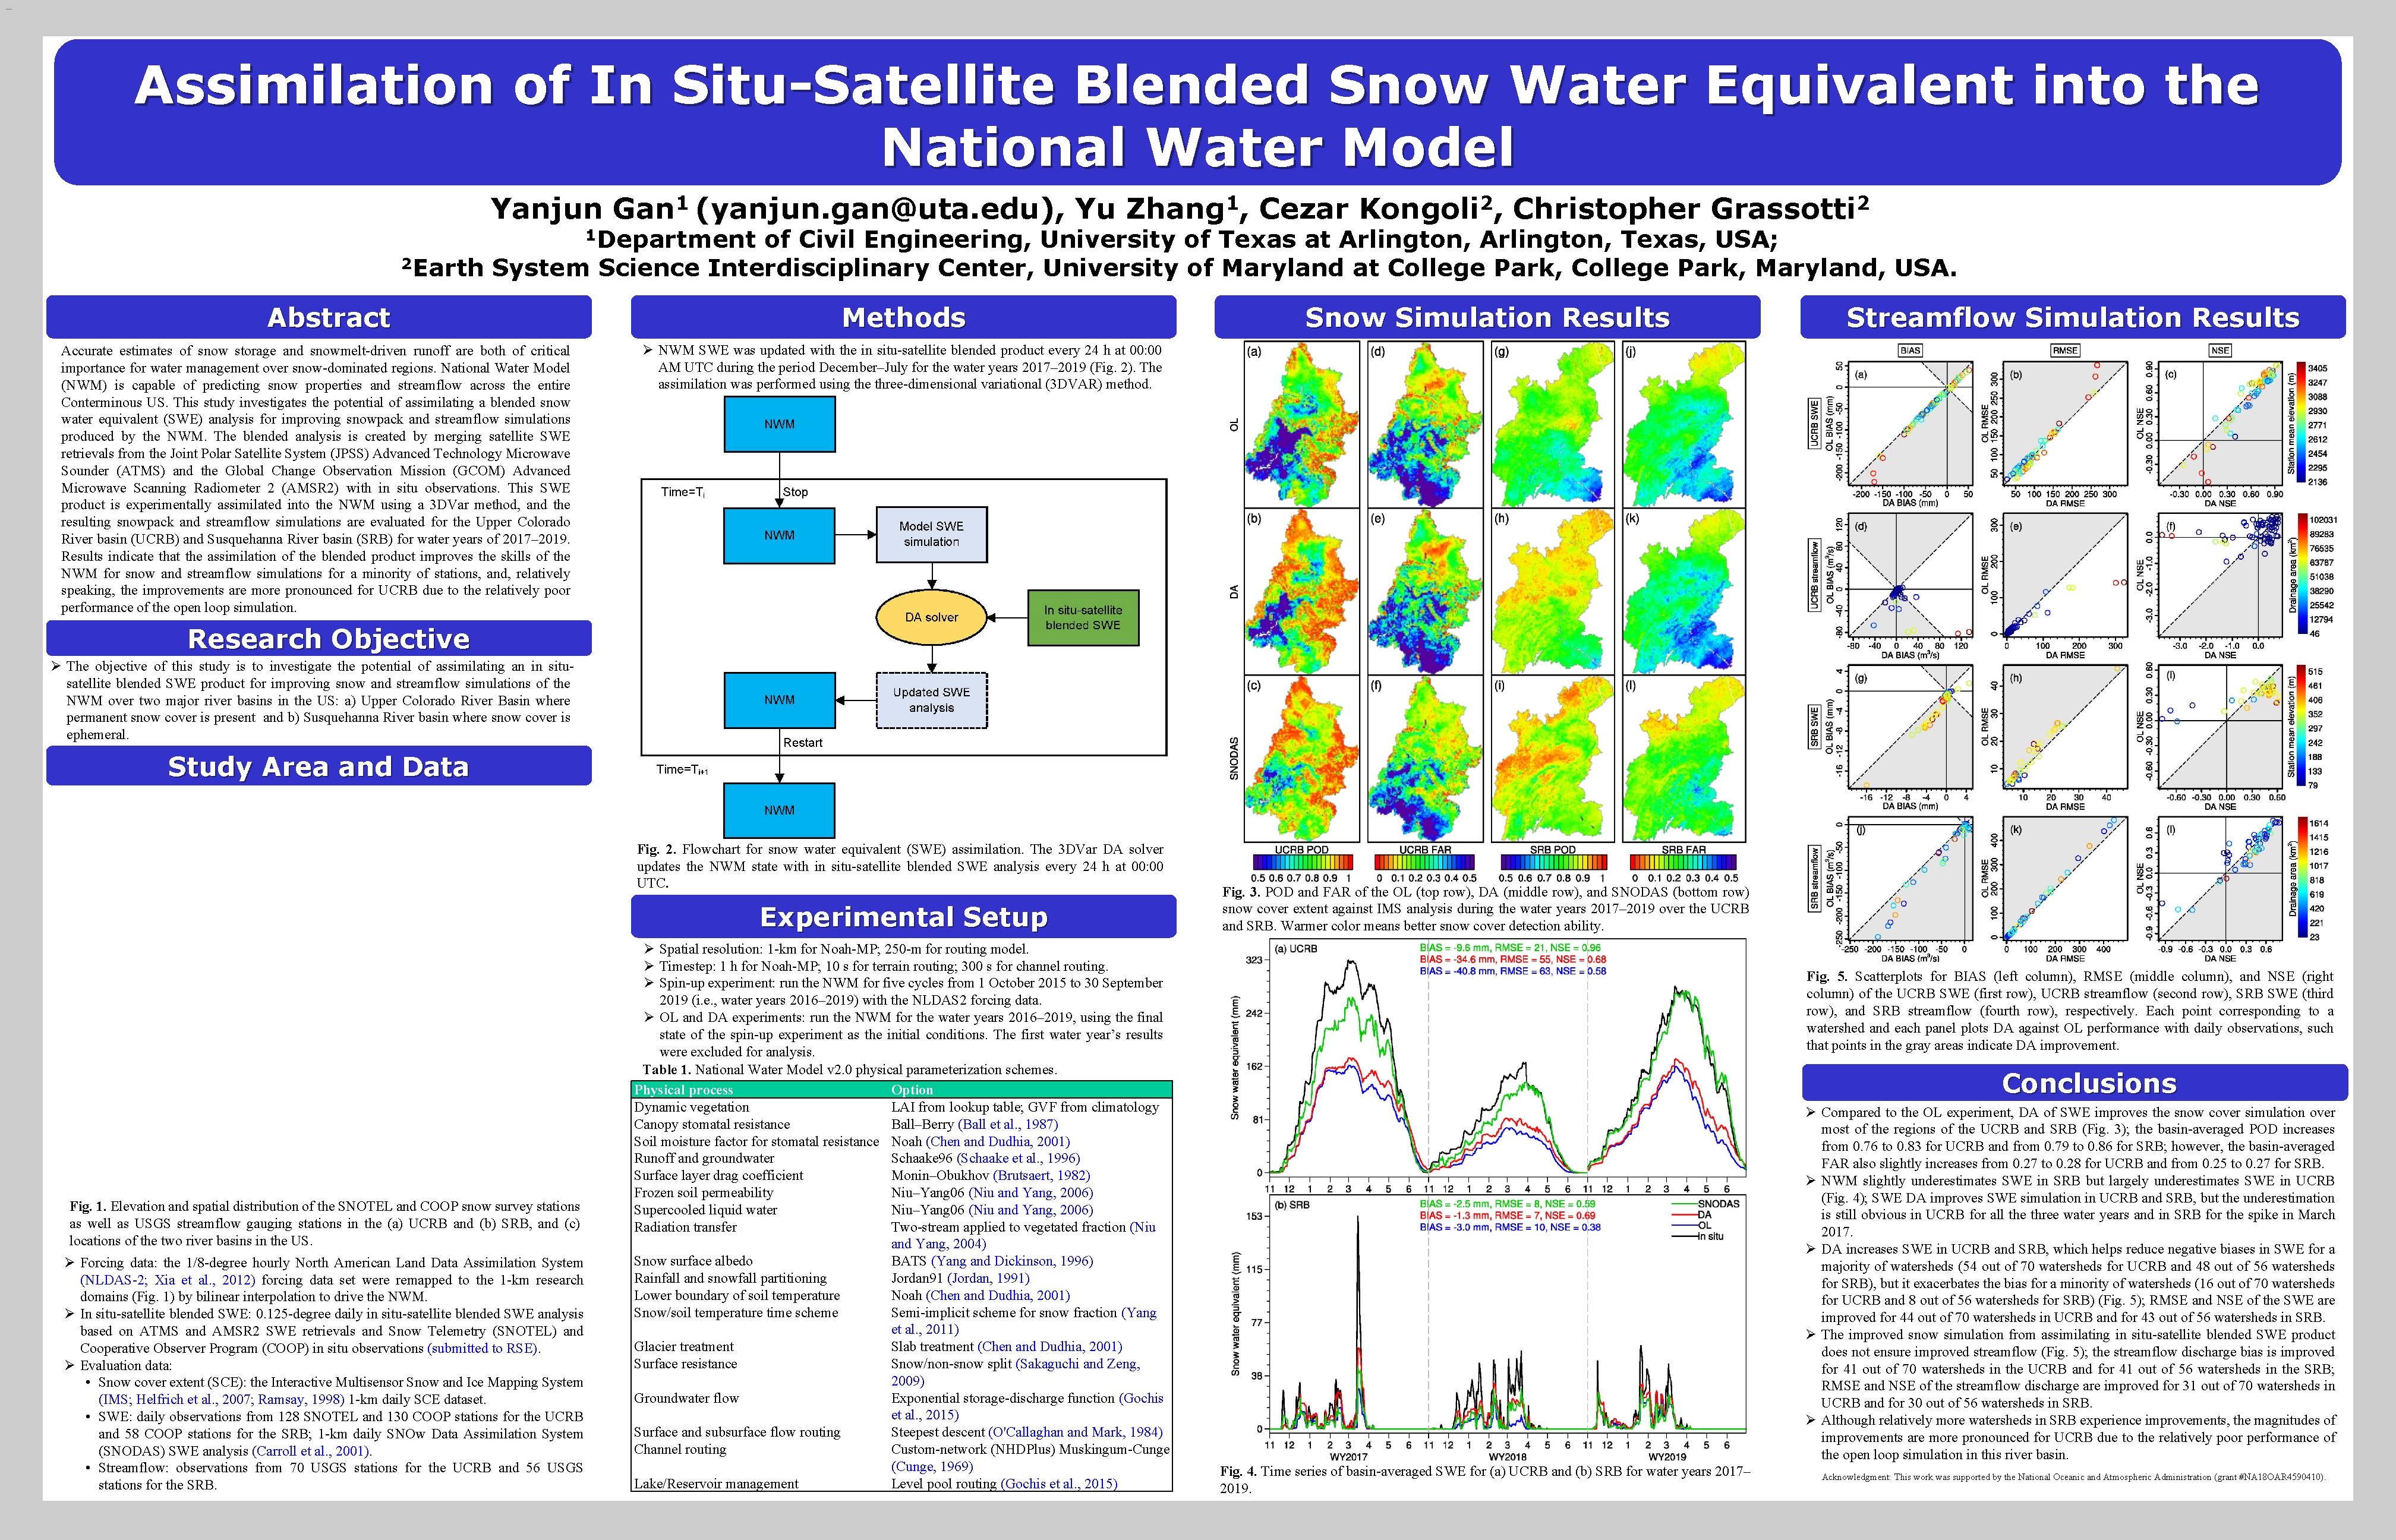 Assimilation of In Situ-Satellite Blended Snow Water Equivalent into the National Water Model Yanjun